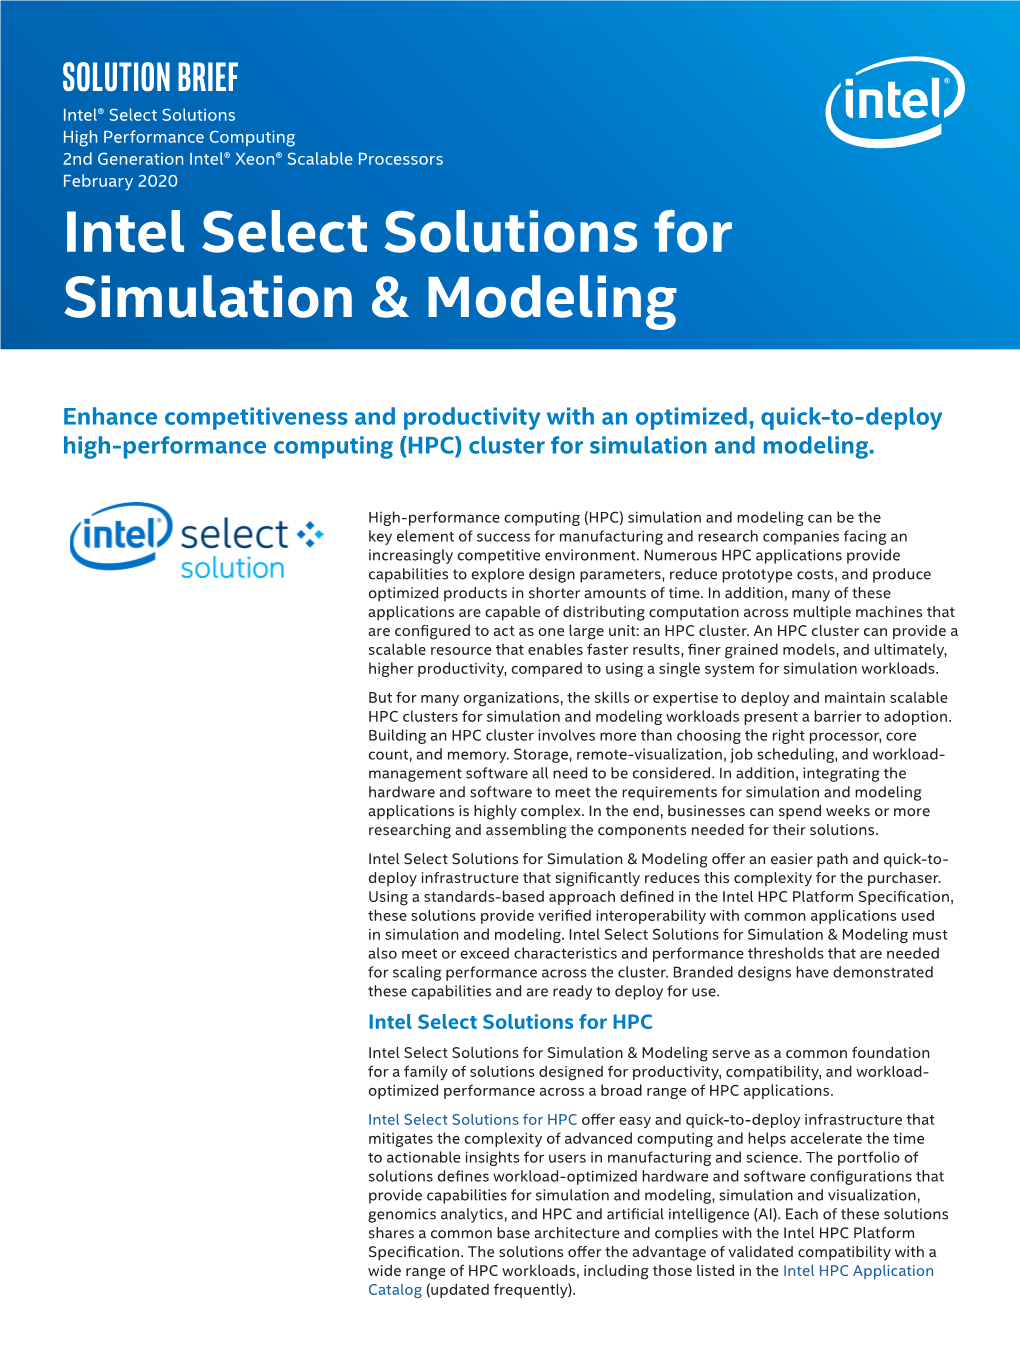 Intel Select Solutions for Simulation & Modeling